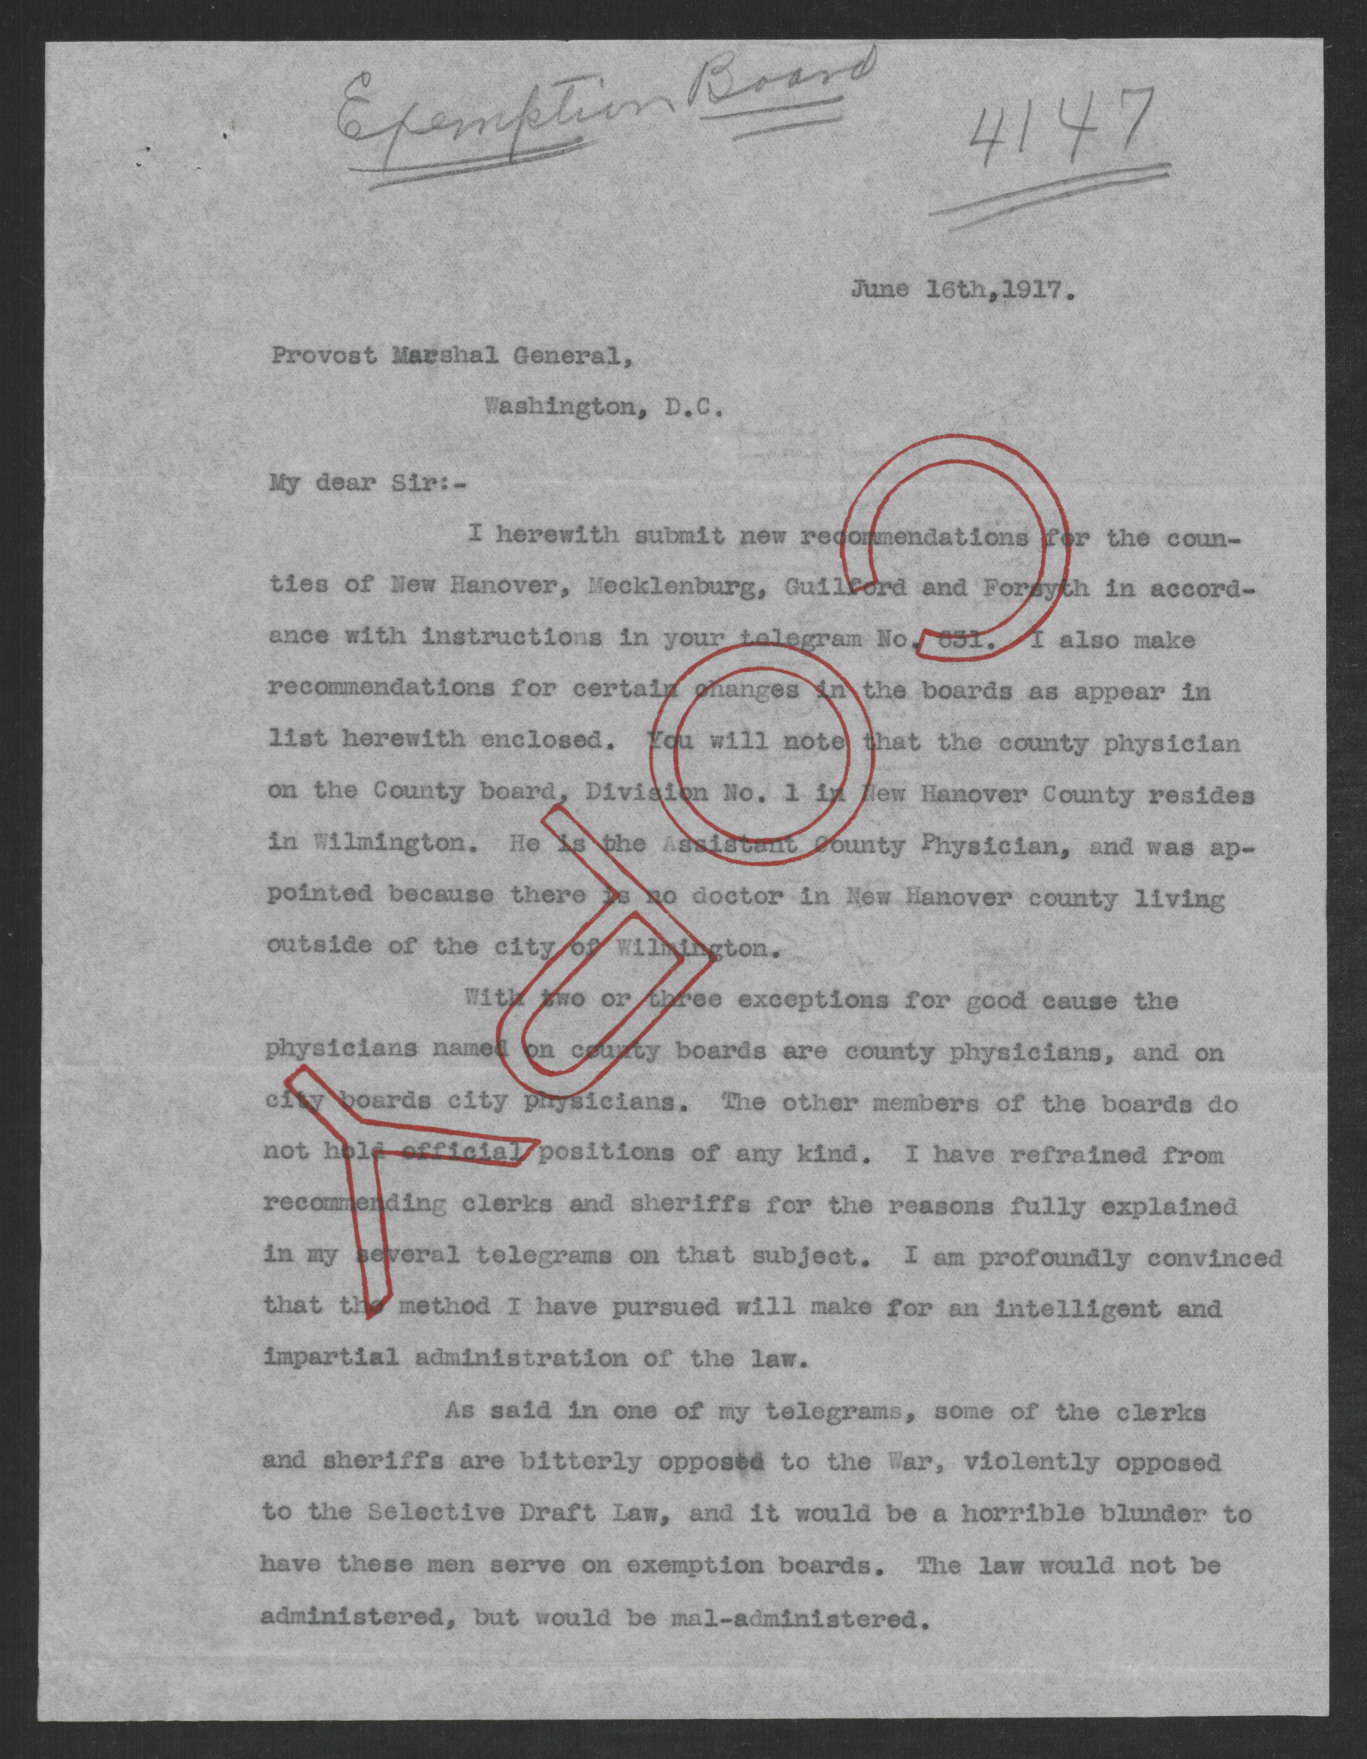 Letter from Thomas W. Bickett to Enoch H. Crowder, June 16, 1917, page 1